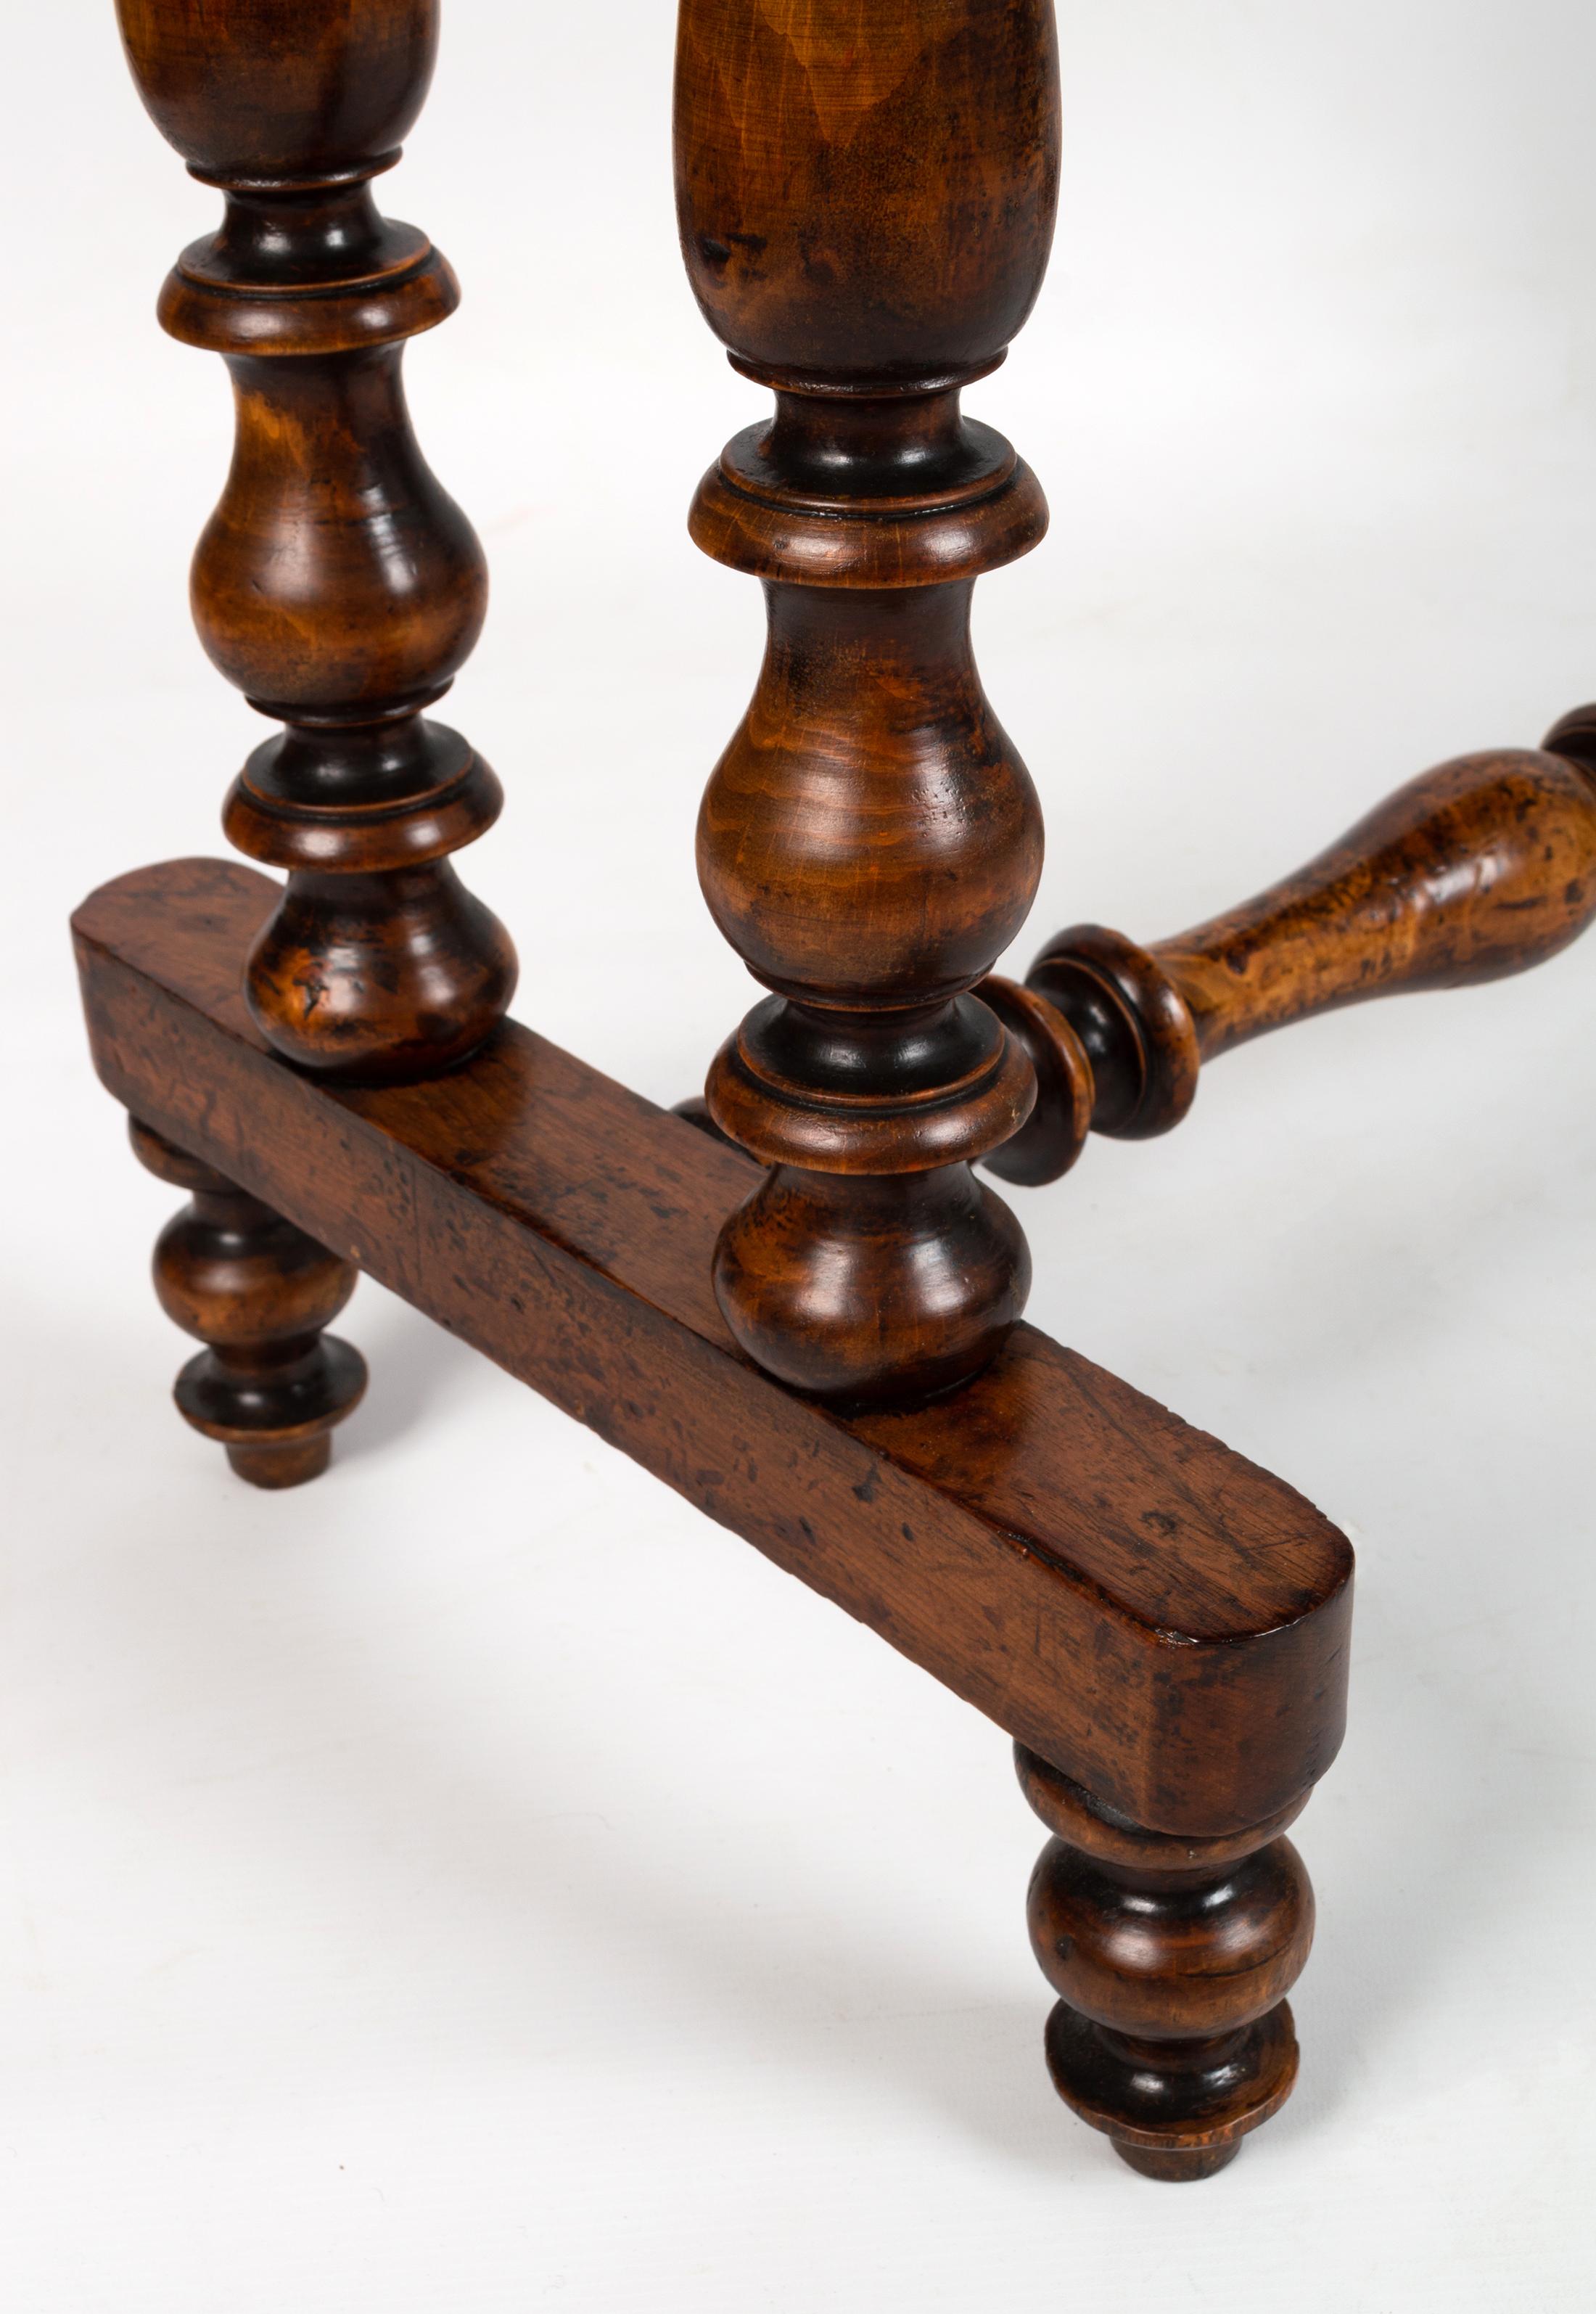 Antique English Edwardian Inlaid Walnut Hall Table Console C.1900 In Good Condition For Sale In London, GB